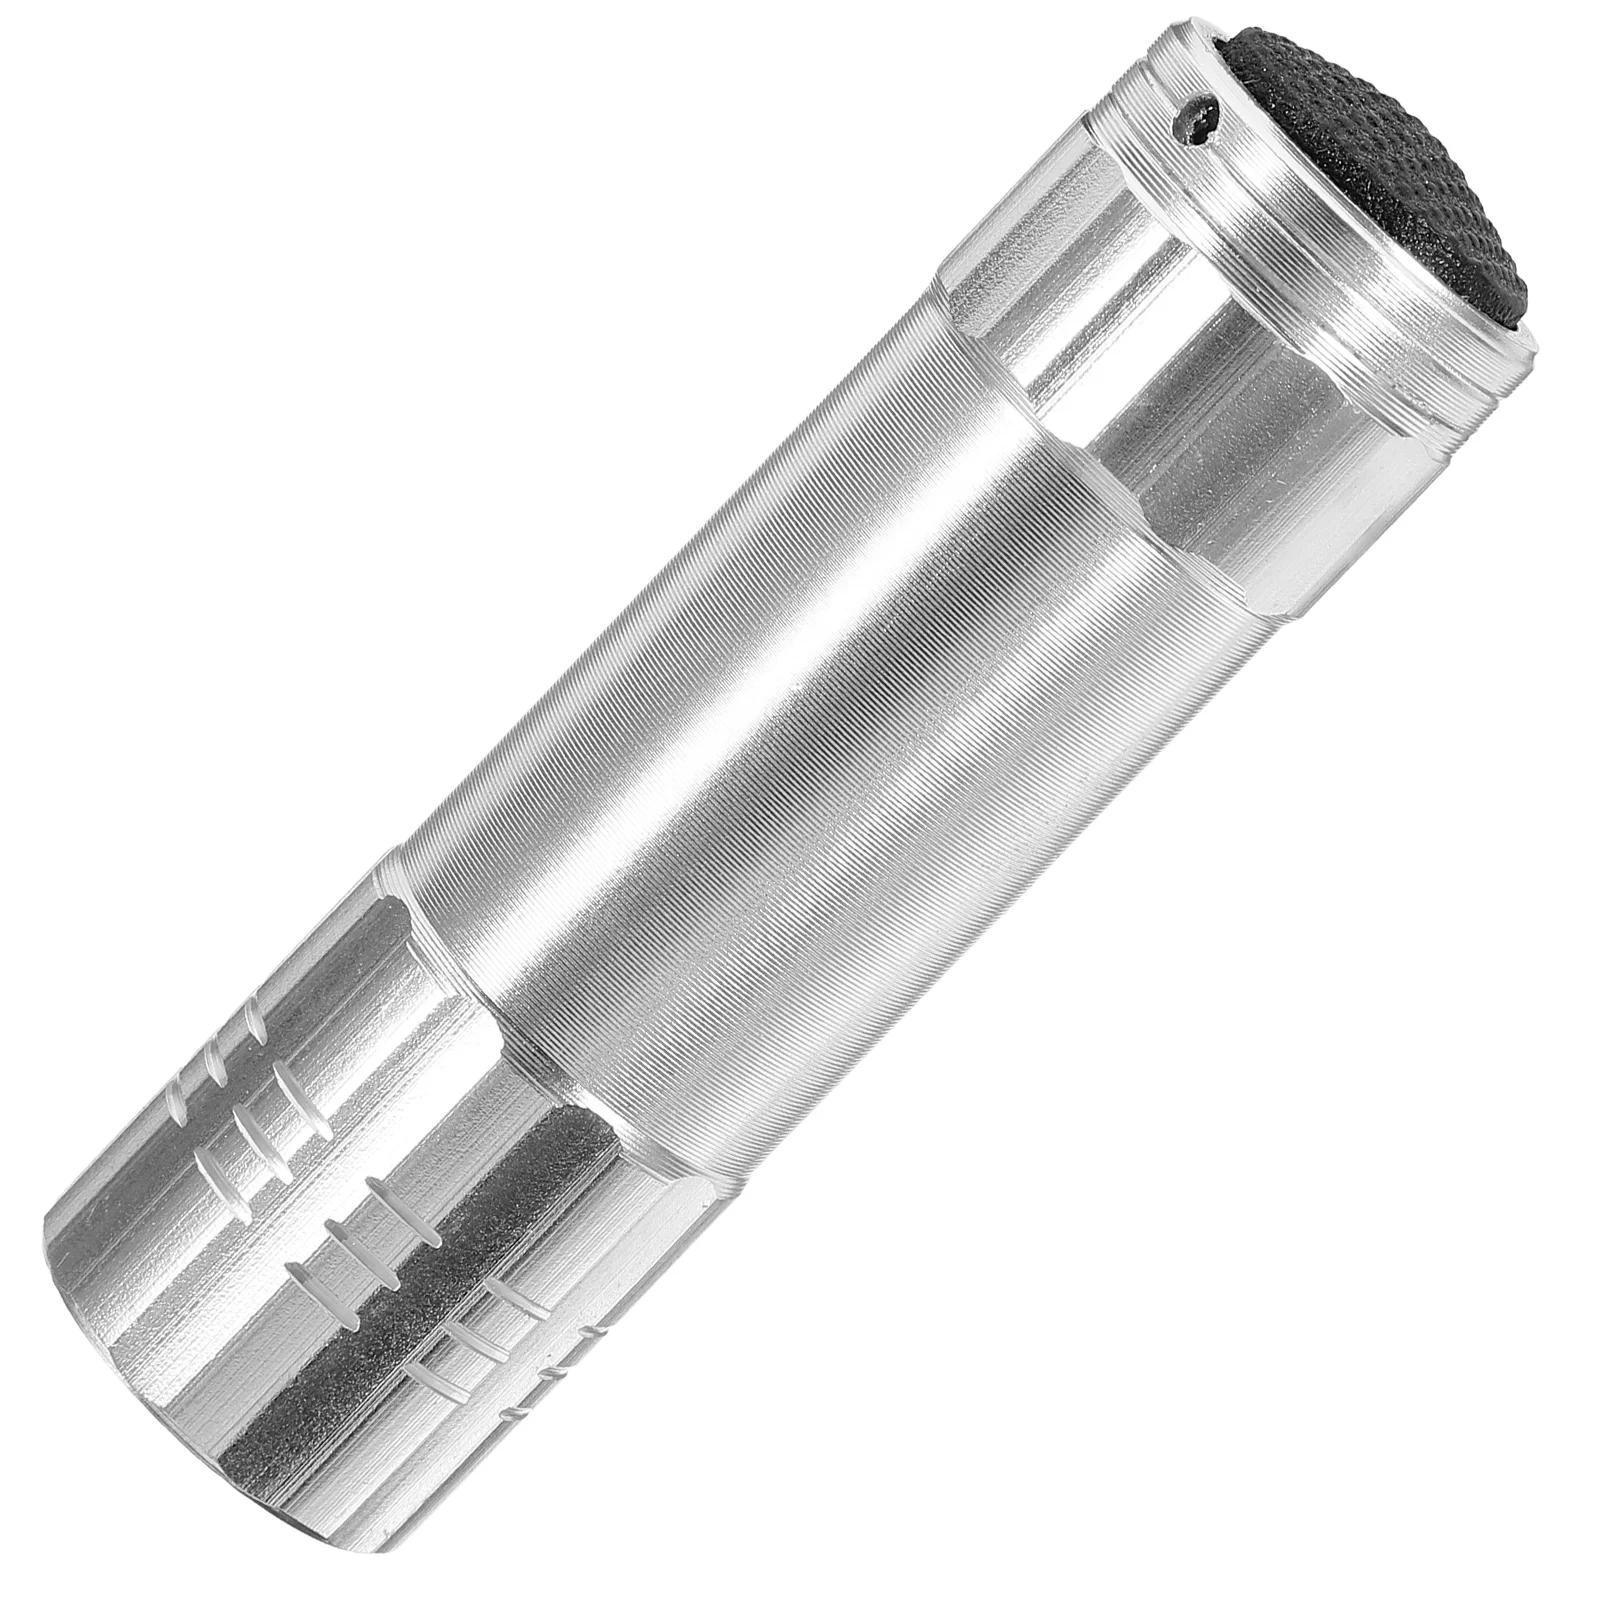 

Flashlight Diversion Can Portable Storage Container Secret Hidden Can for Coins Cash Jewelries